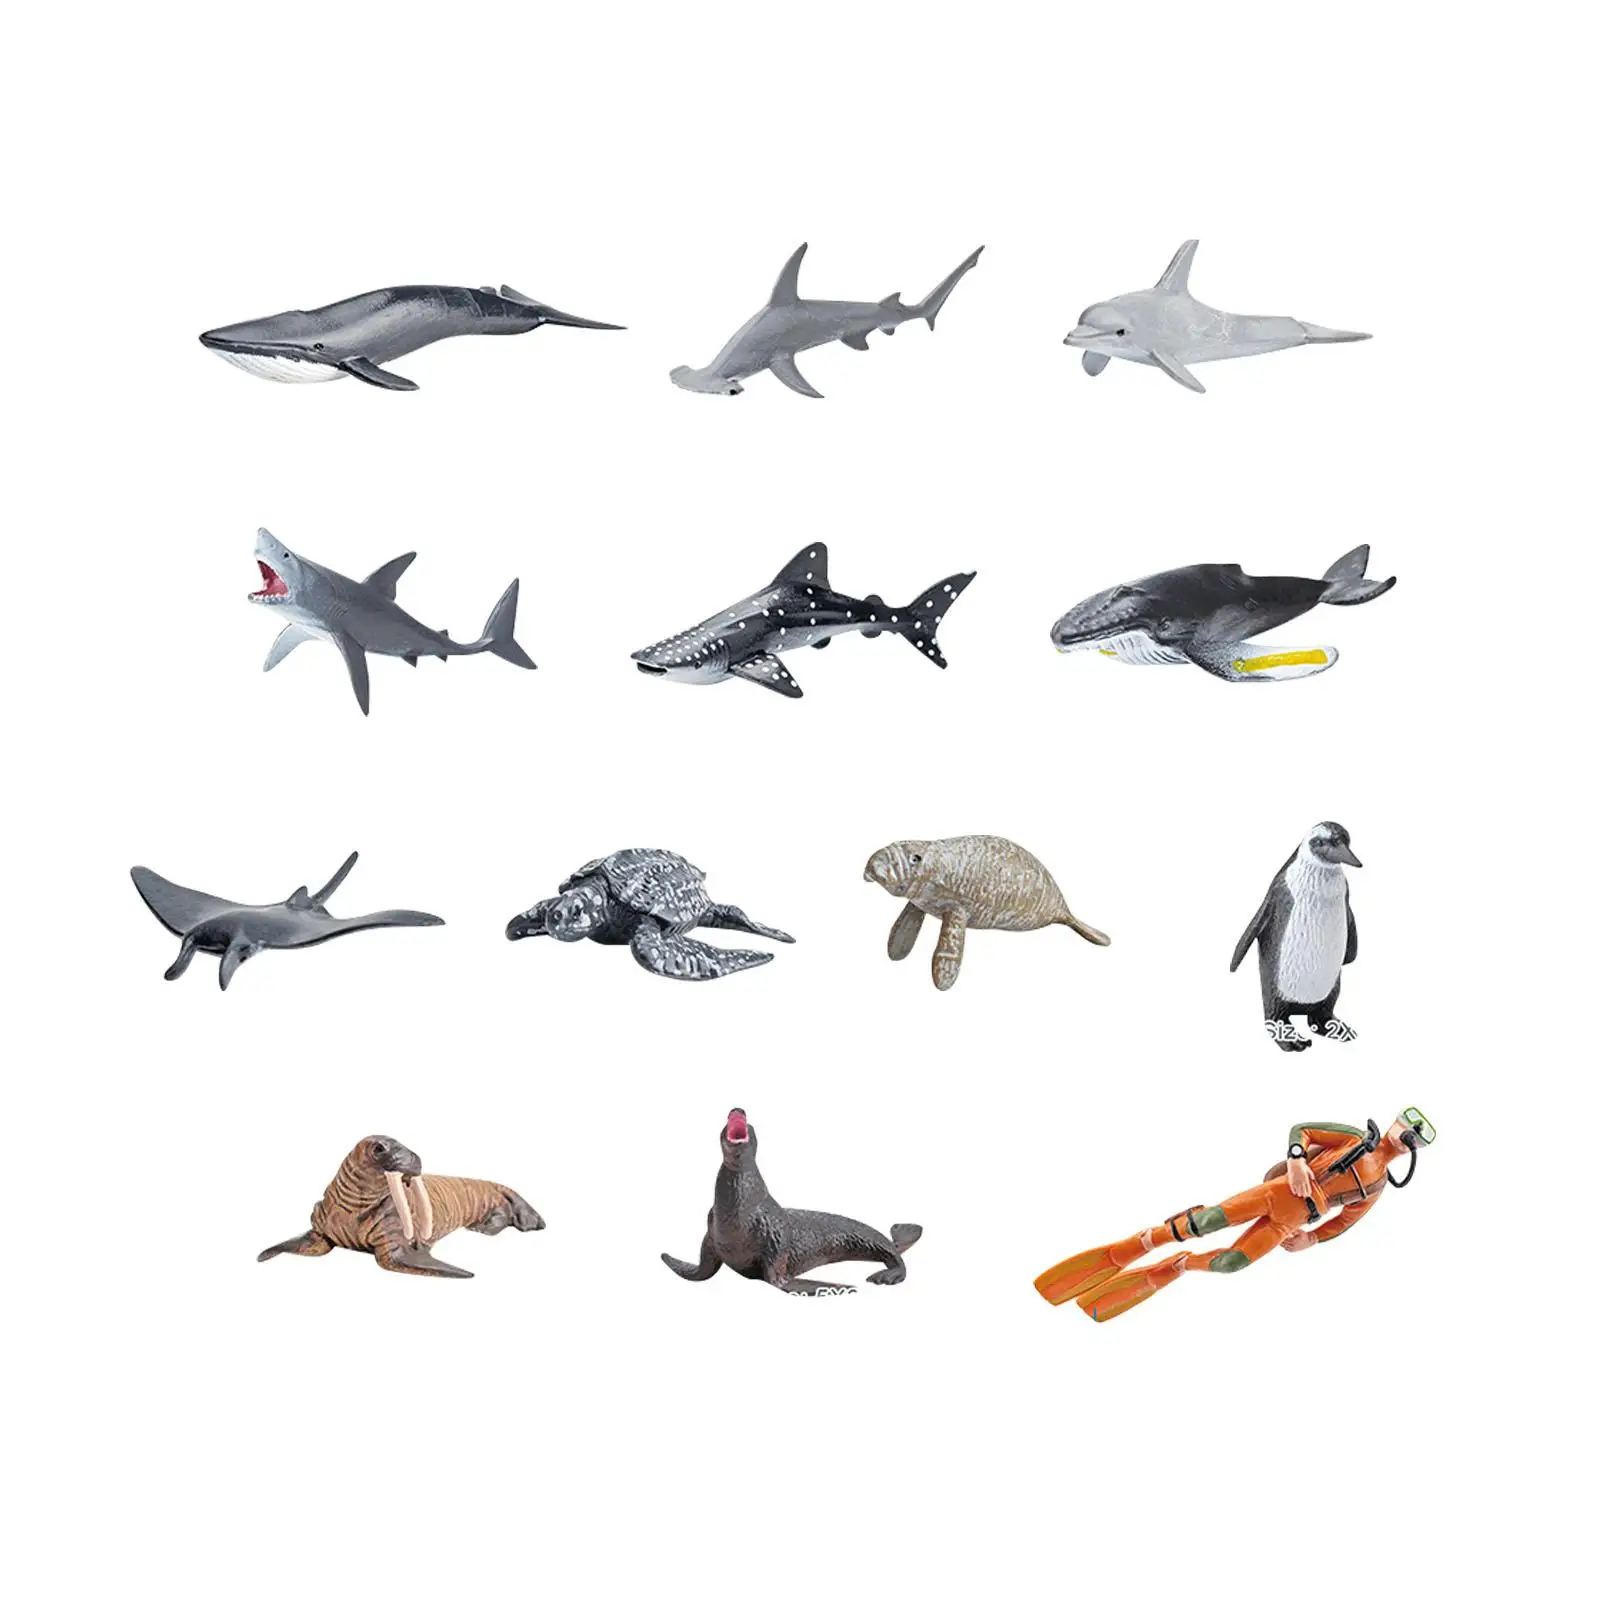 13Pcs Marine Animal Set Creatures Figurines Simulation Animal Model Toy Mini Animal for Preschool Toy Ages 5 6 7 8 Years Old